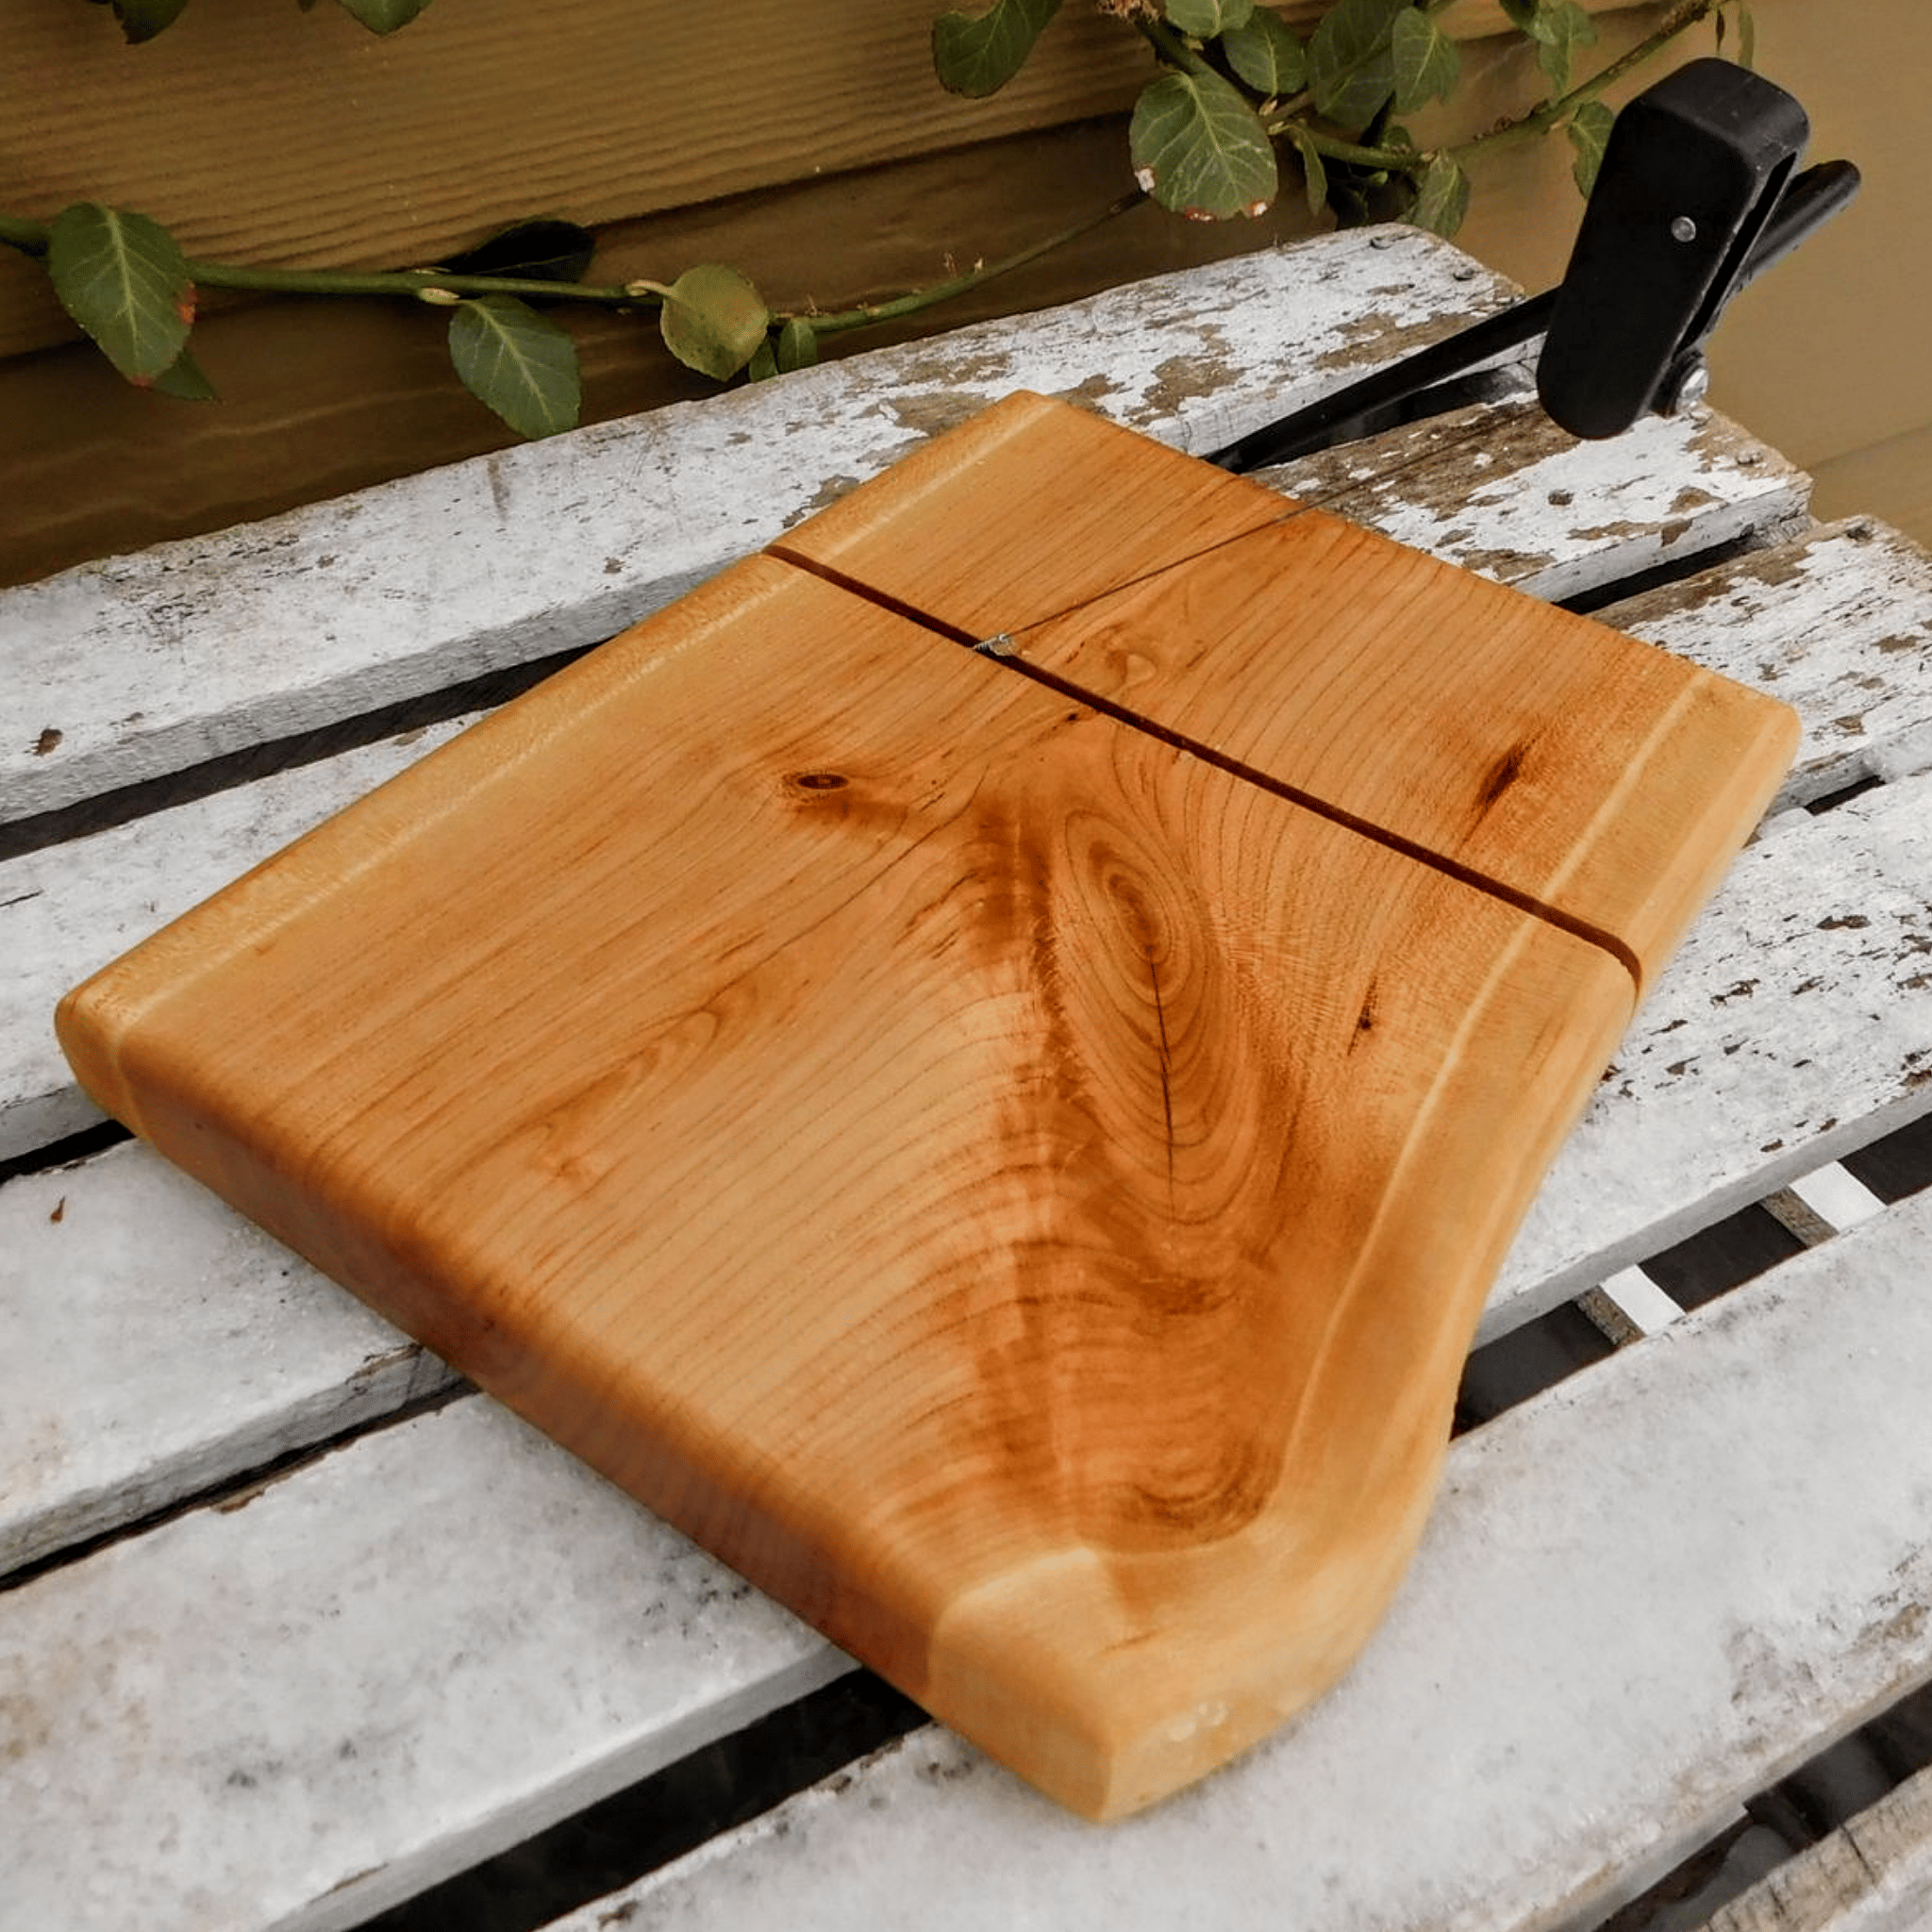 Cherry Wood cheese cutting board, finished in a food grade oil and beeswax mixture.